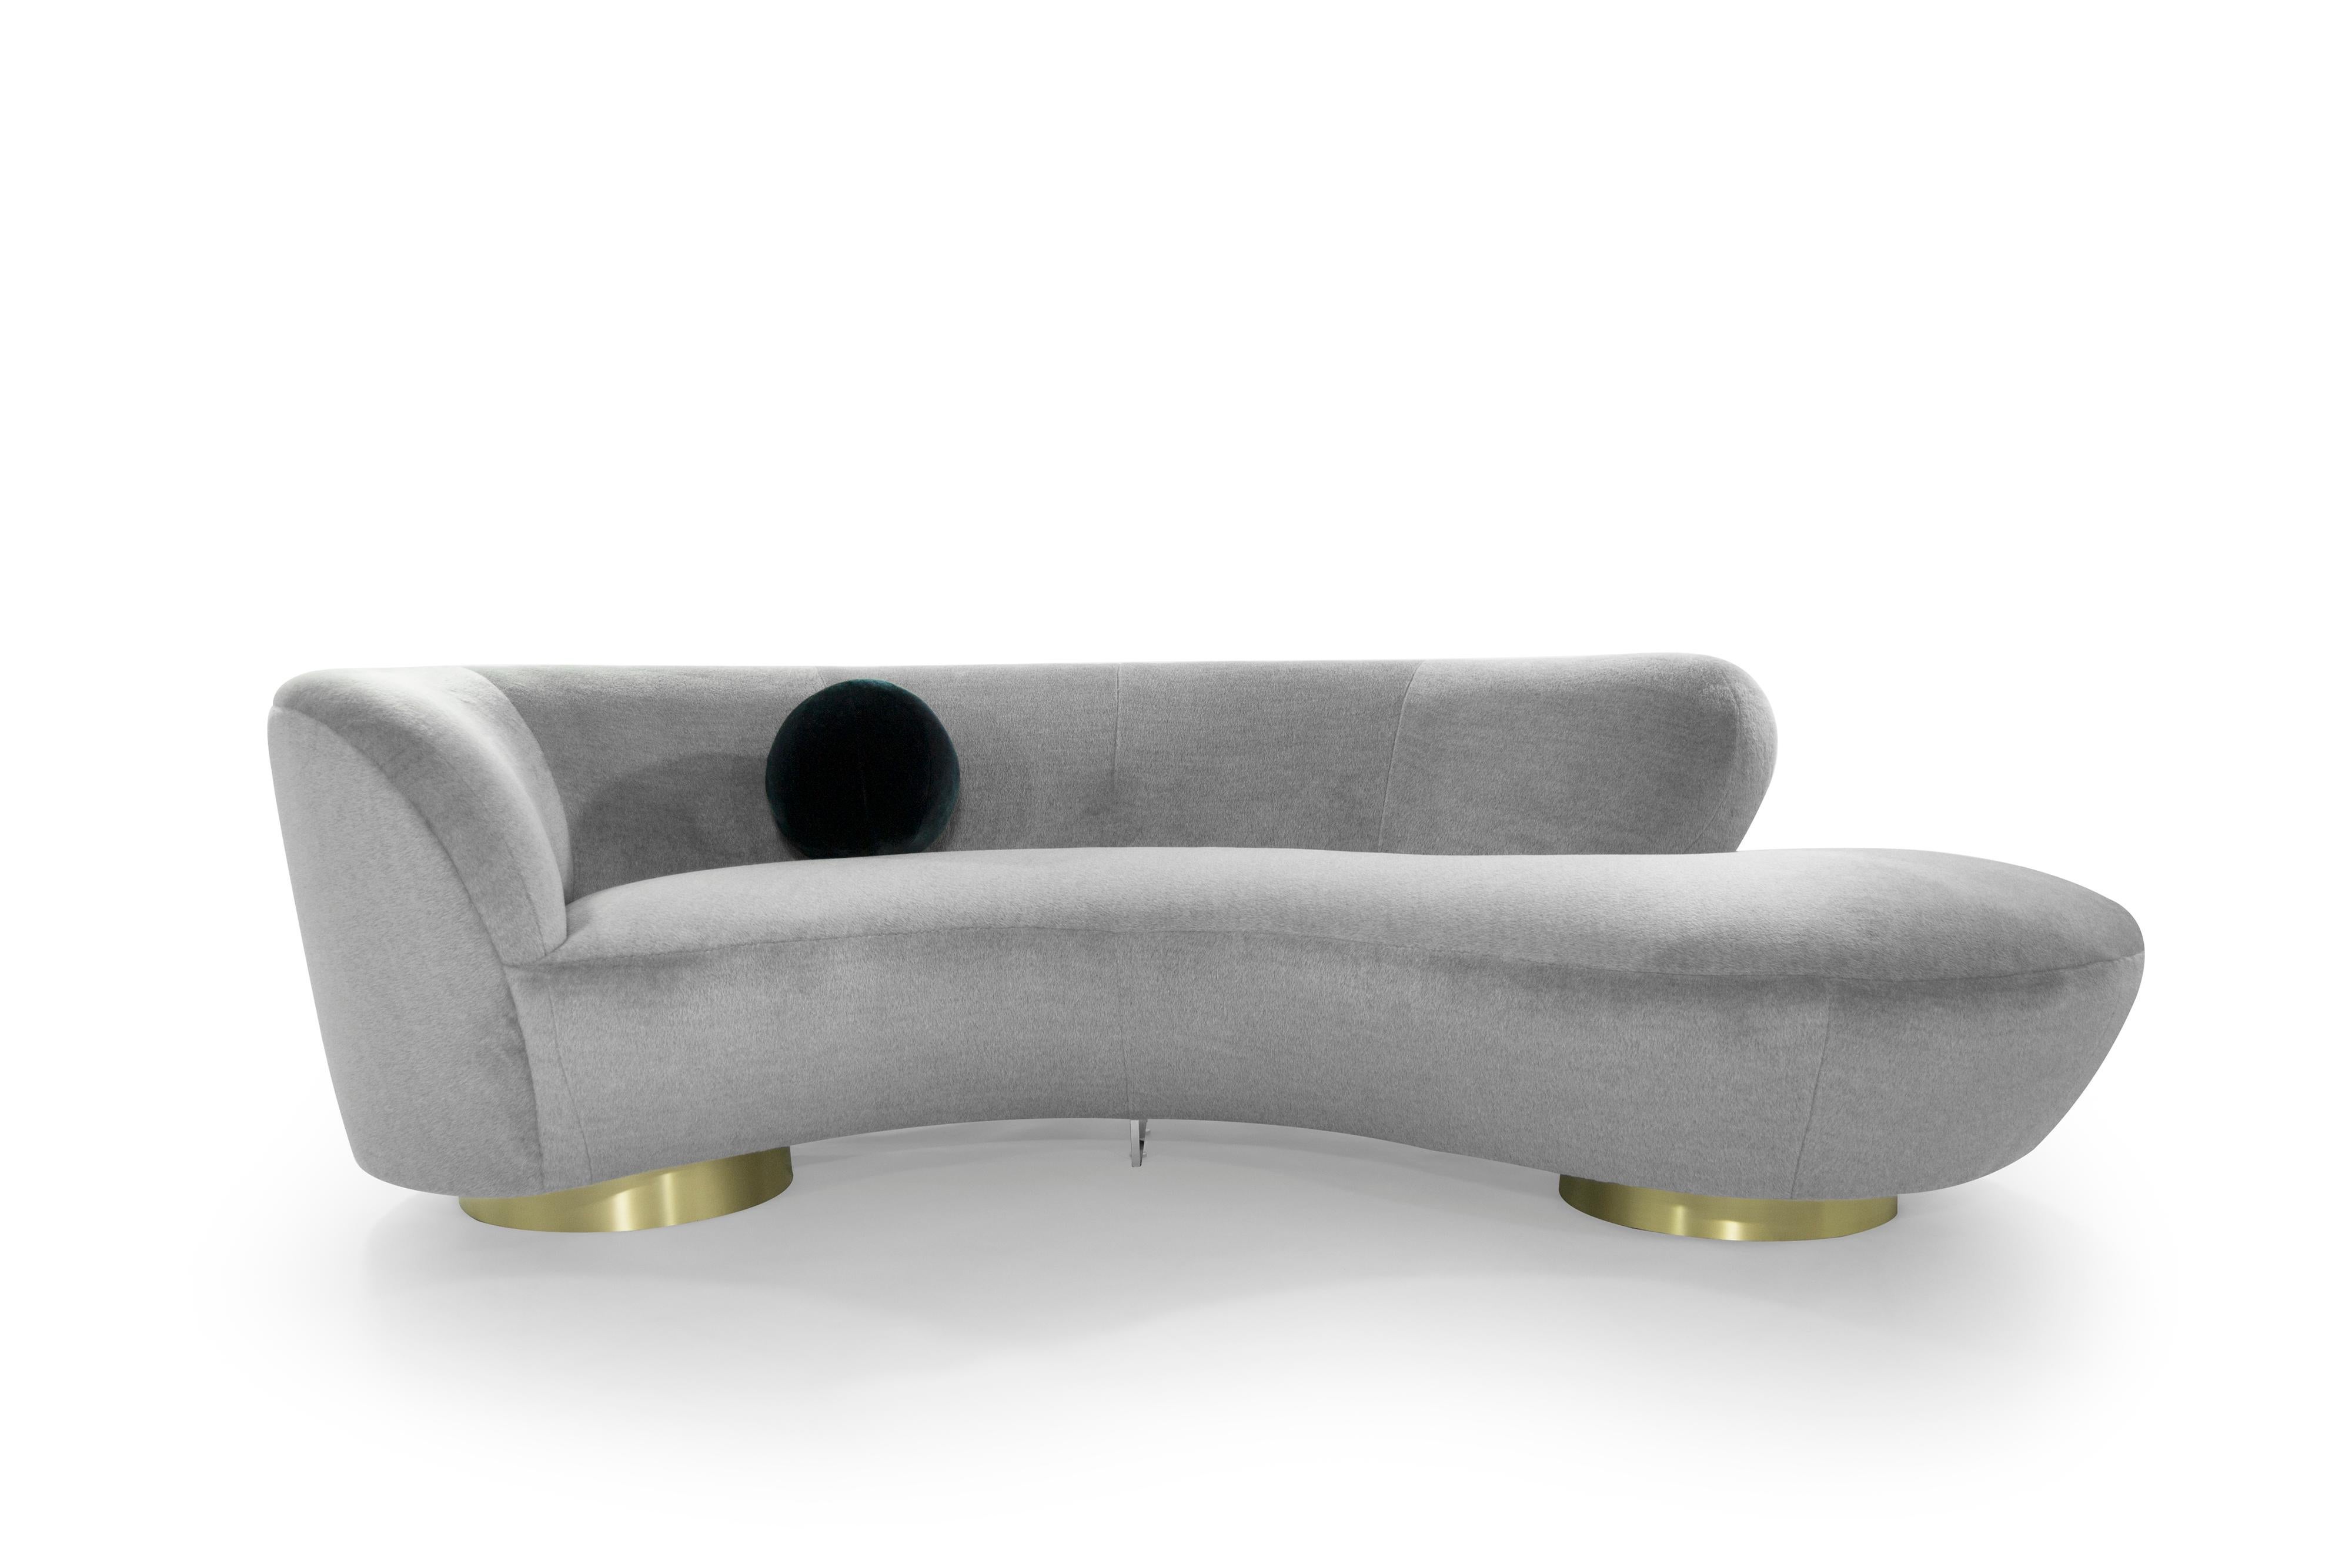 Stunning serpentine or cloud sofa designed by the late Vladimir Kagan for Directional, circa 1970s.

Completely restored down to its very frame, spring system, foam, straps and Dacron have all been updated. Re-upholstered in a stunningly beautiful